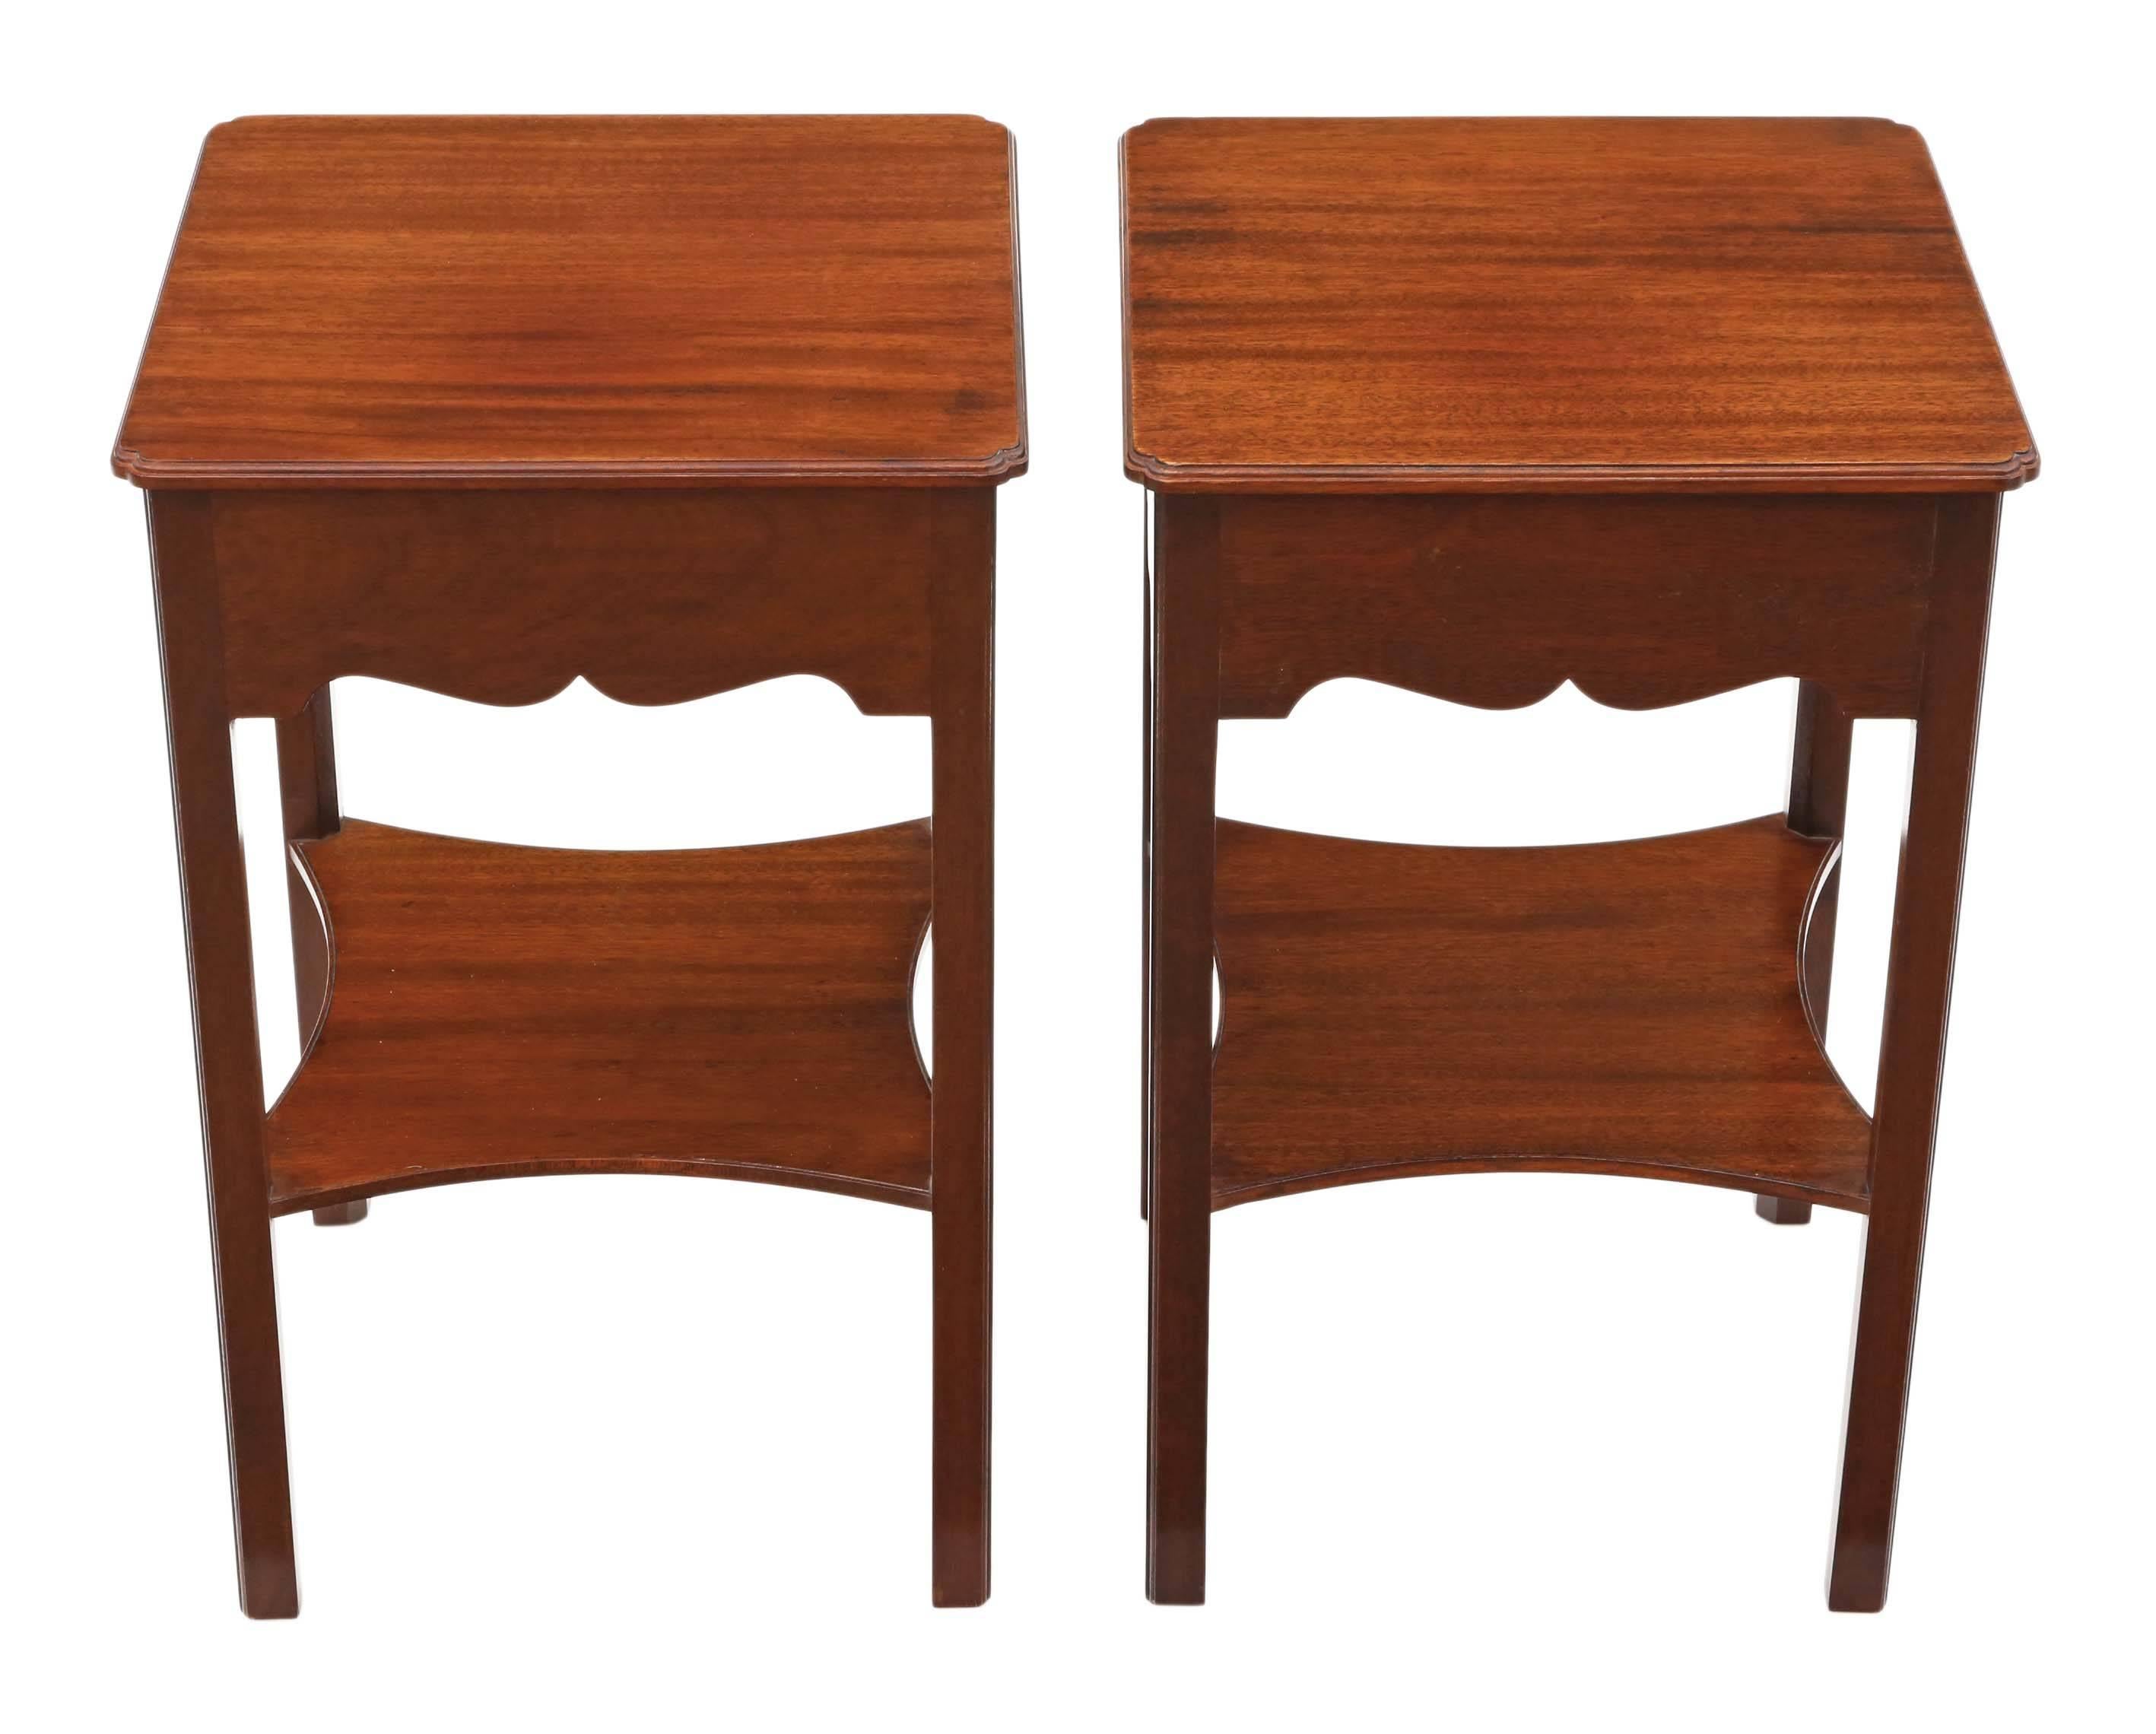 20th Century Antique Pair of Georgian Mahogany Bedside or Lamp Tables Redman and Hales For Sale